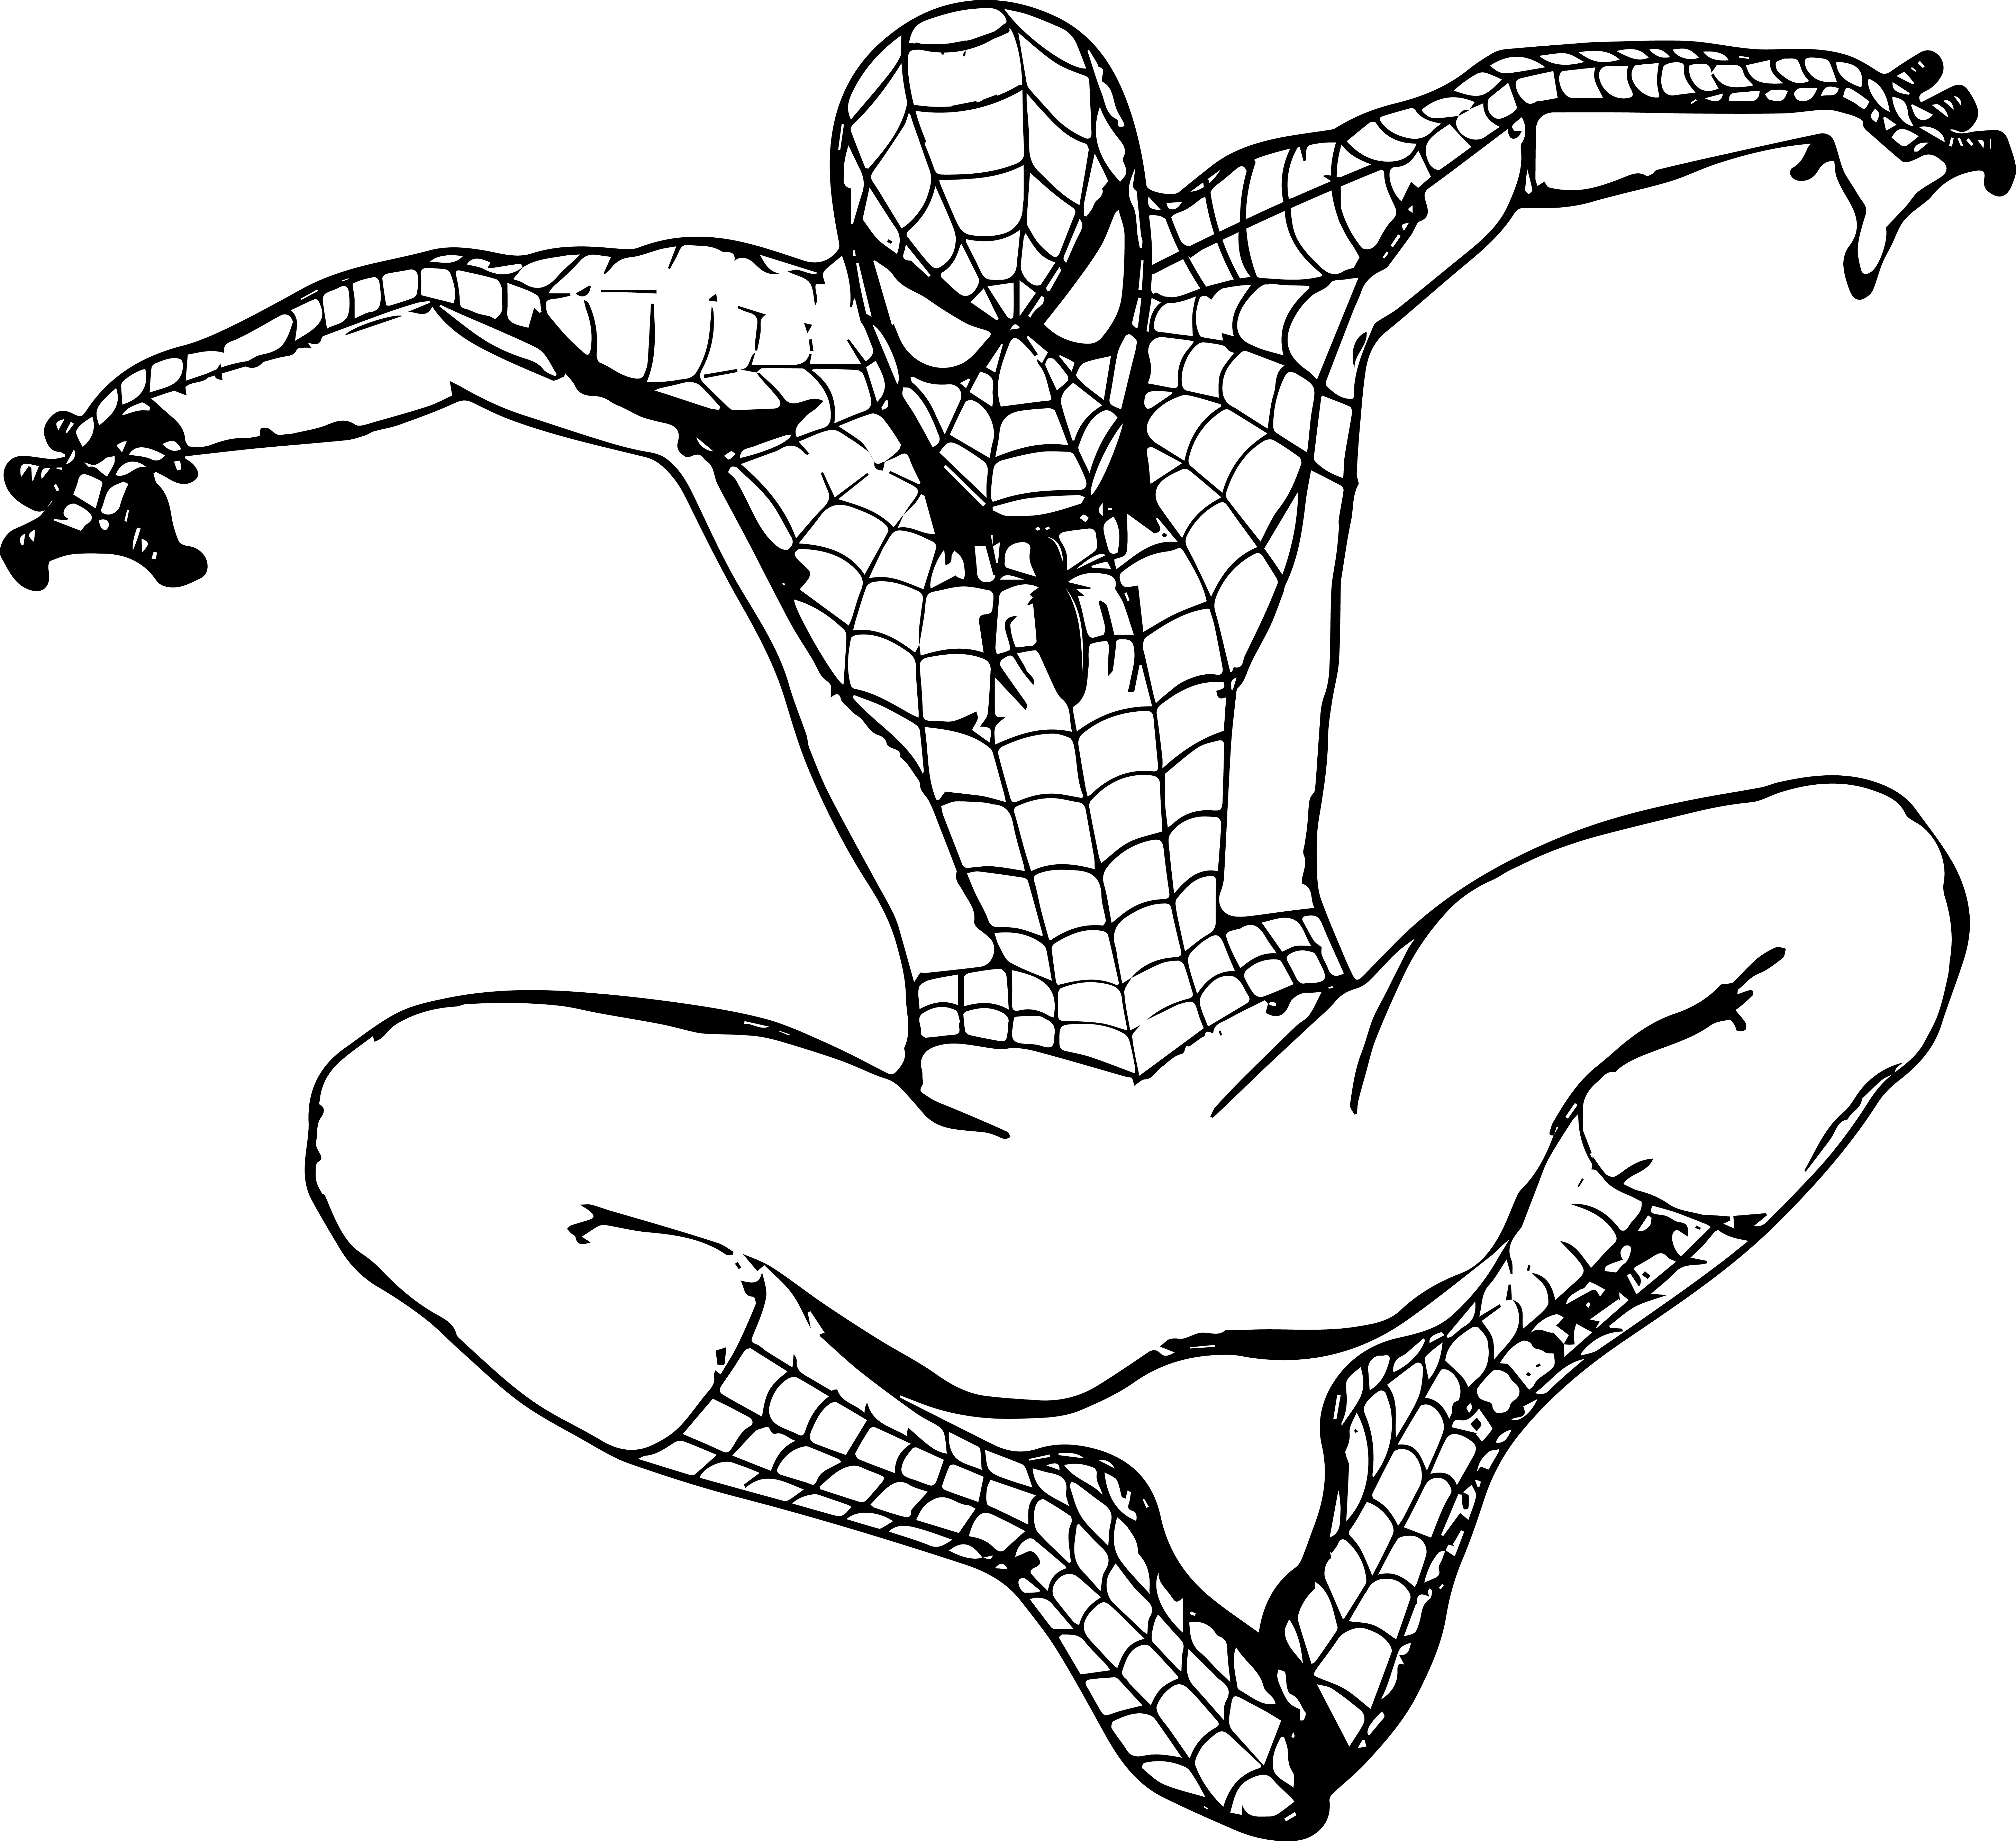 Black Spiderman Coloring Pages at GetColorings.com | Free ...